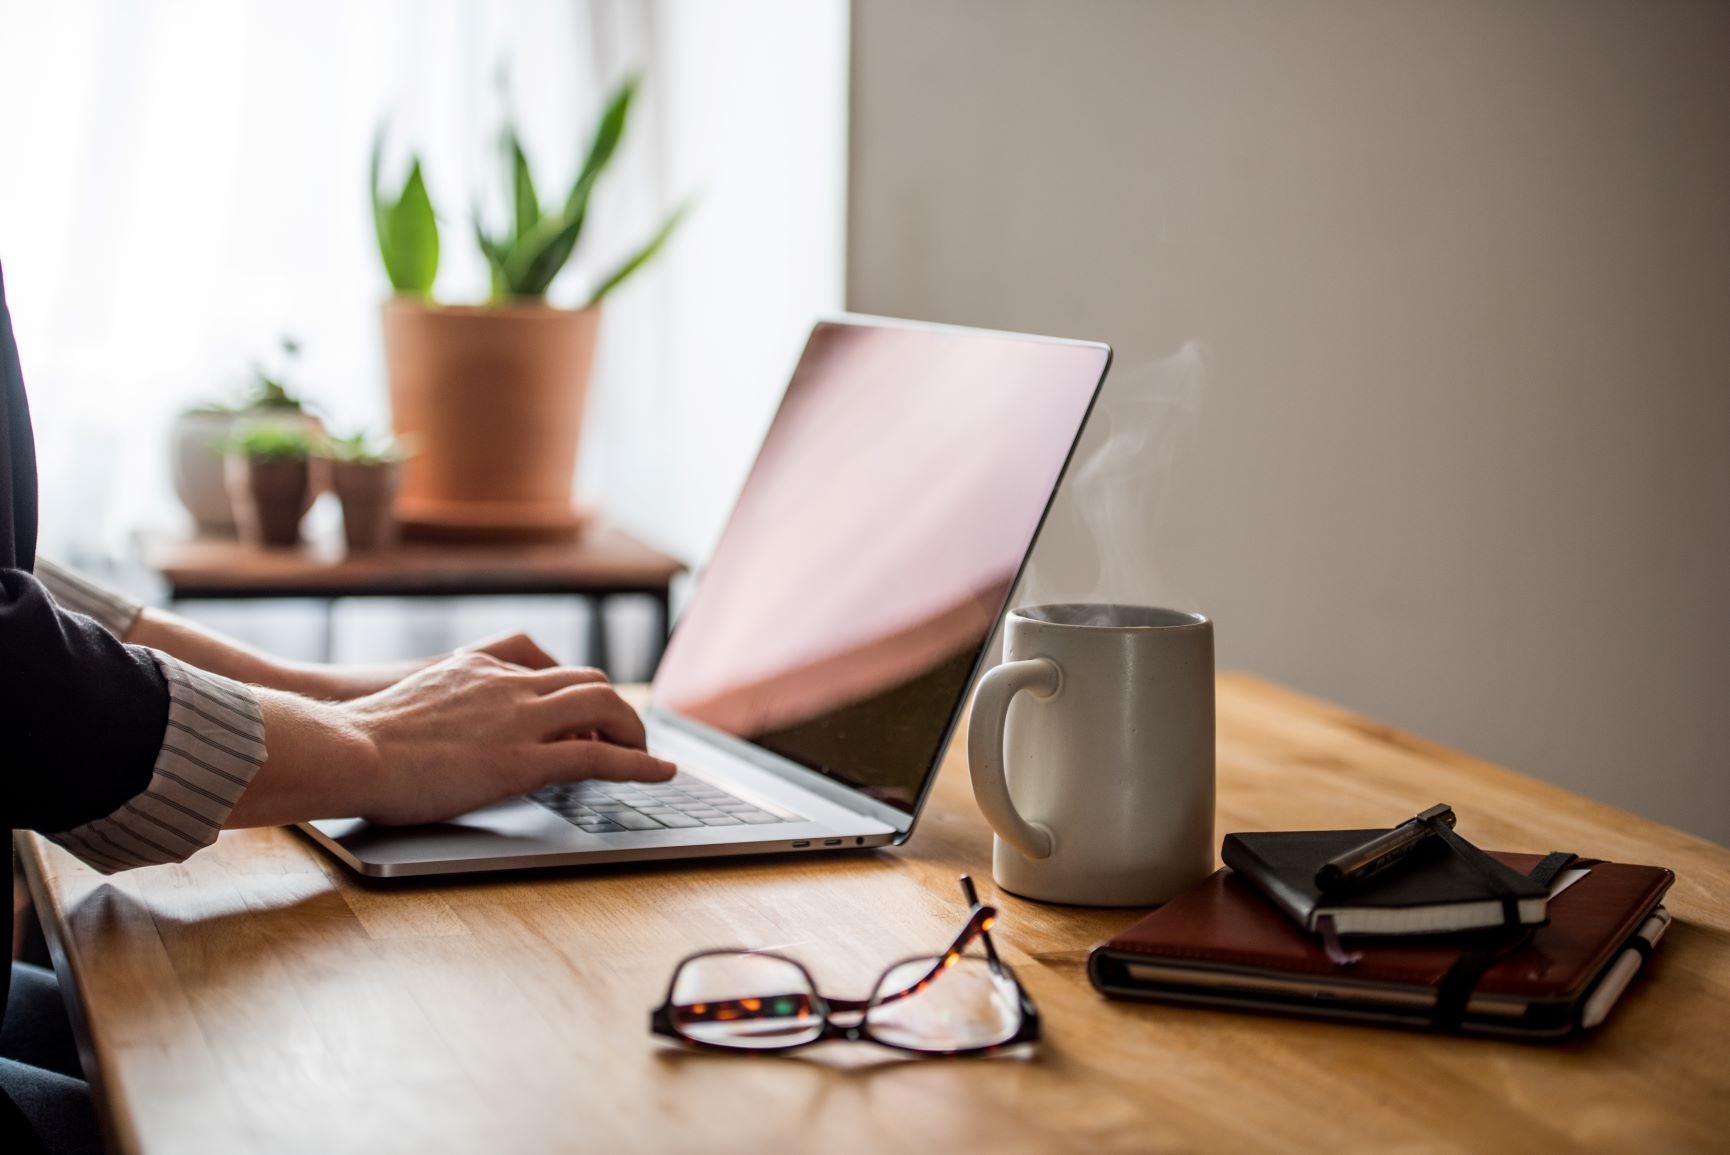 Working from home? This tax credit could apply to you | Canadian Union of Public Employees